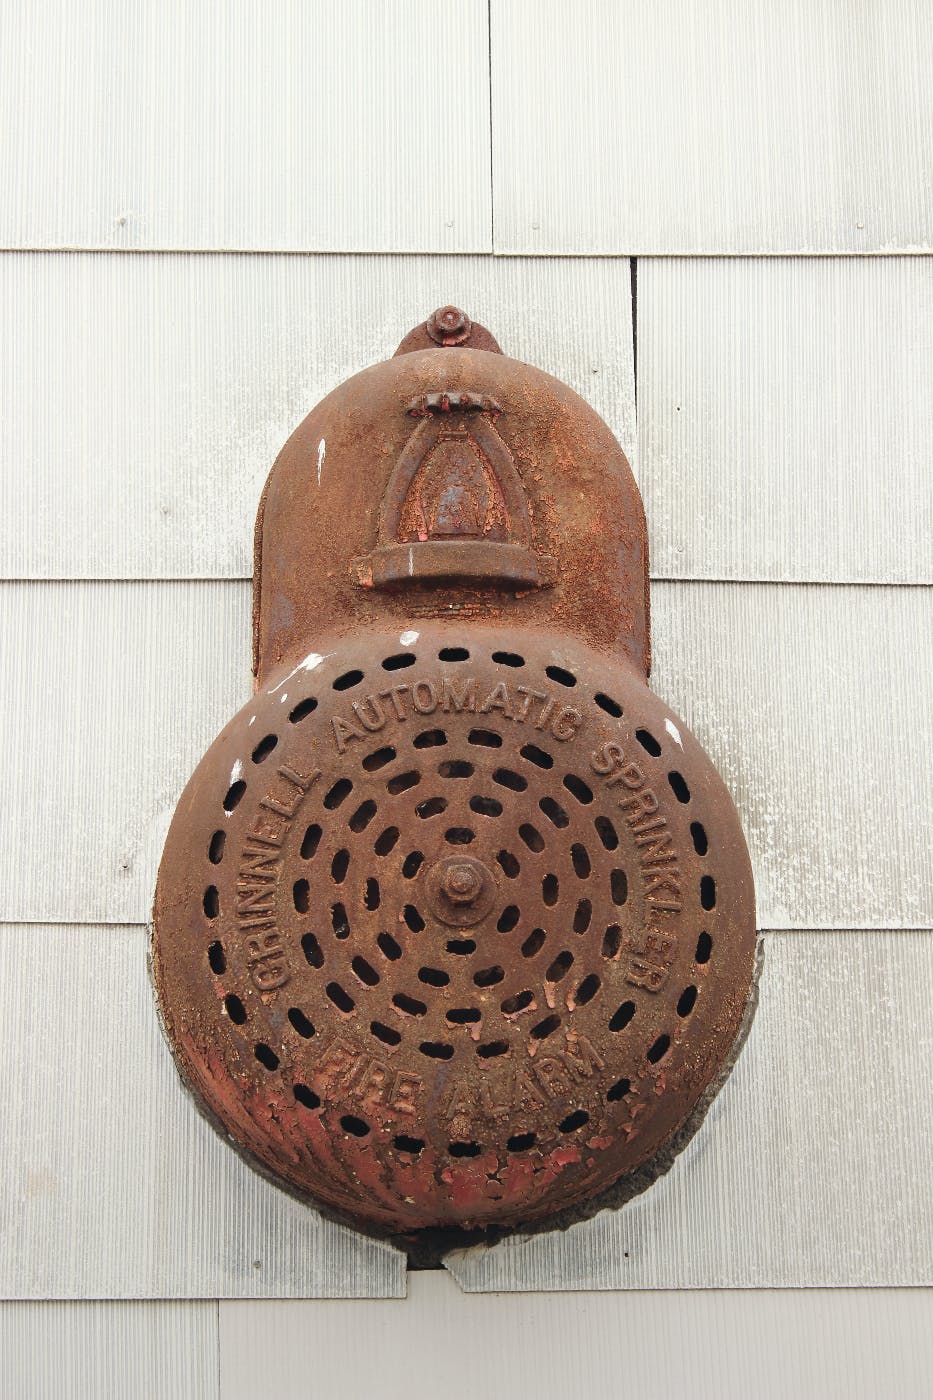 an antique, rusted automatic sprinkler